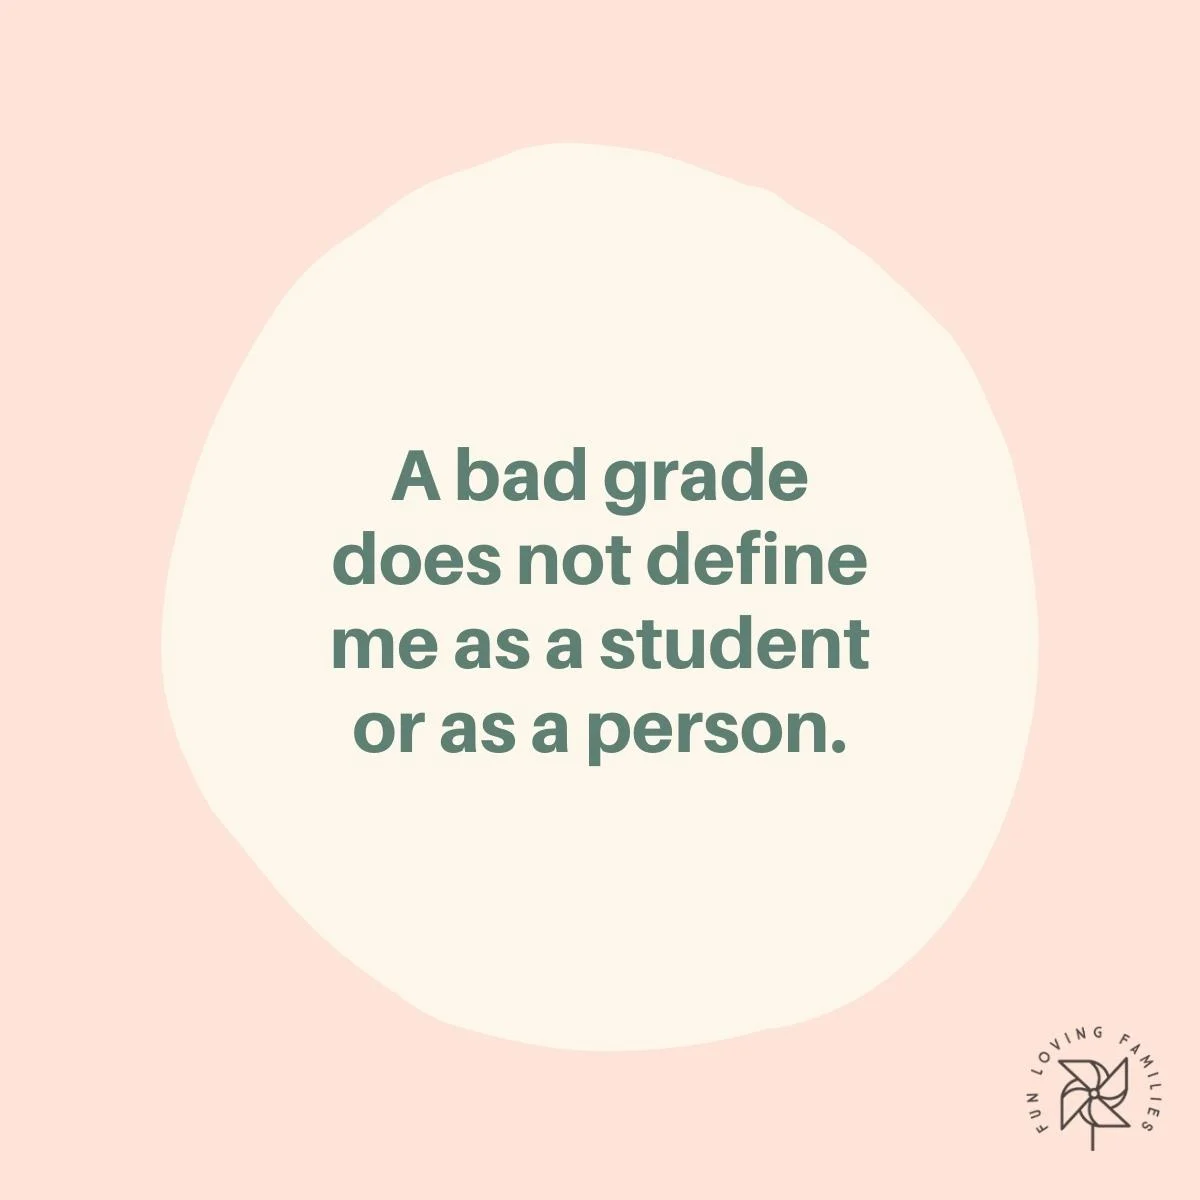 A bad grade does not define me as a student or as a person affirmation